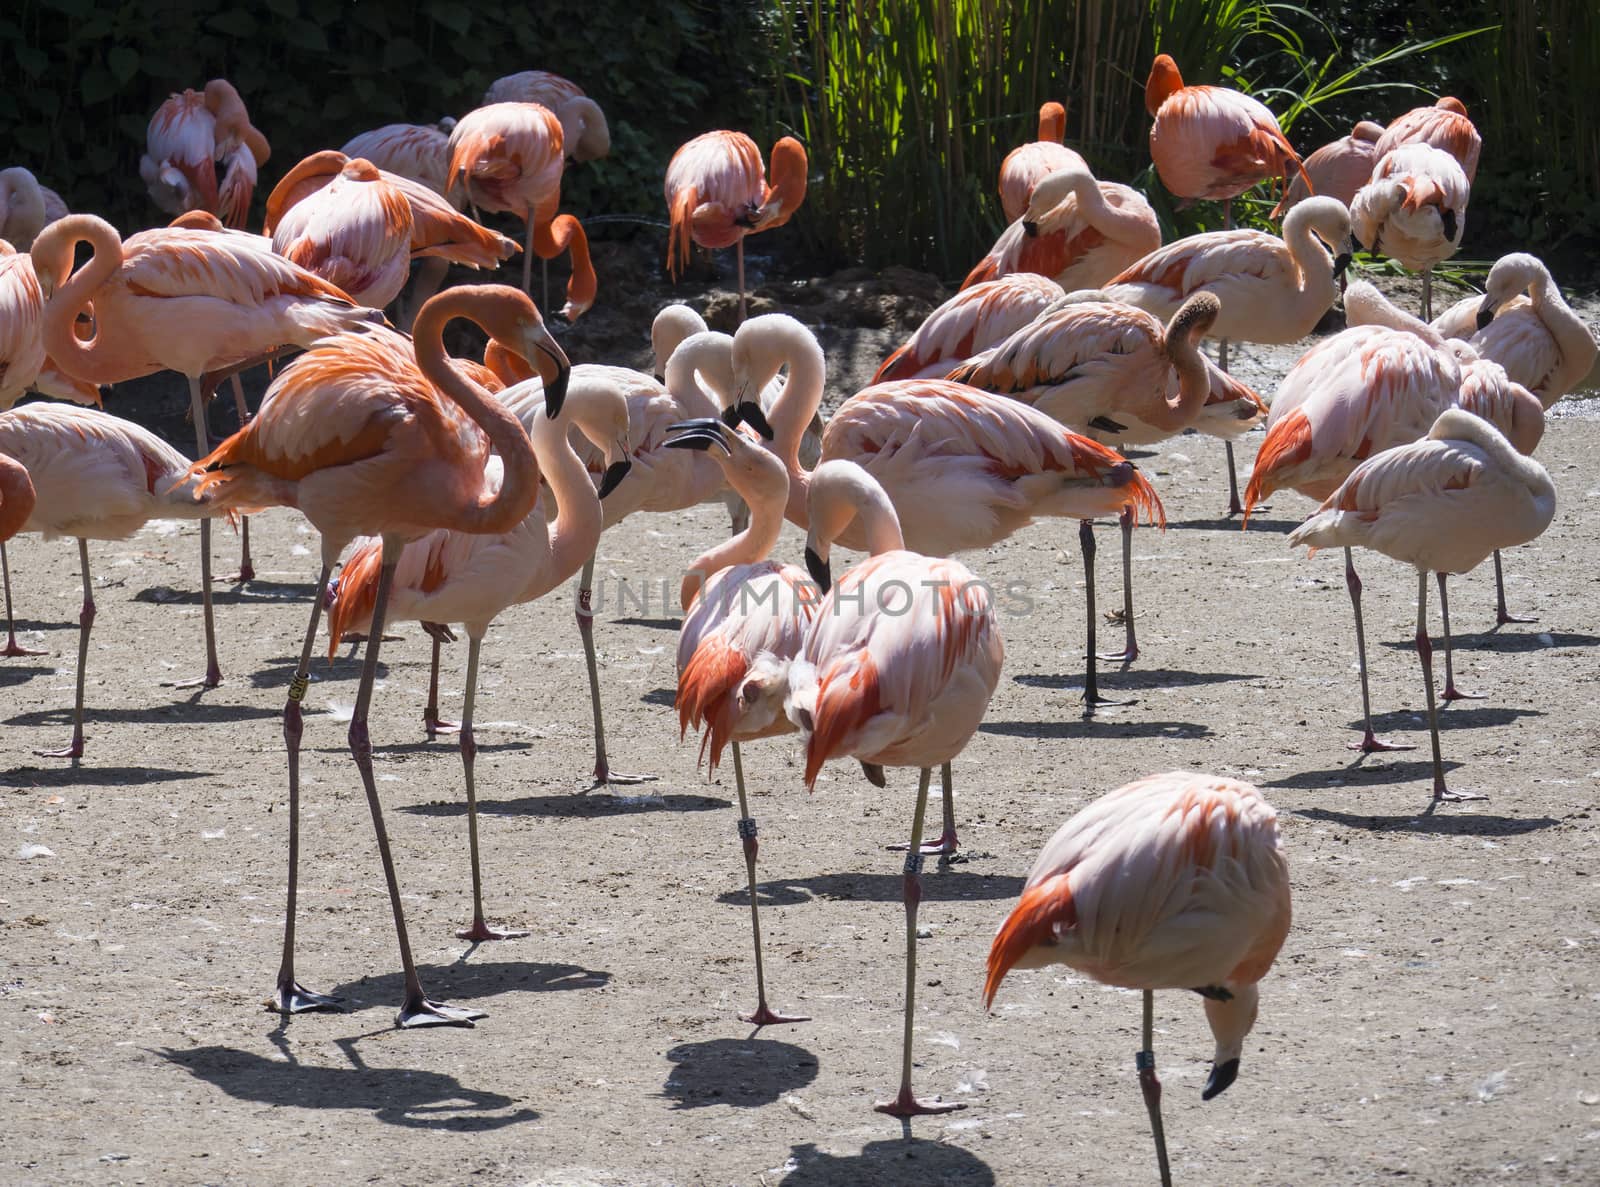 Group of red and pink flamingos standing on dirt. Chilean flamingo Phoenicopterus chilensis and The American flamingo Phoenicopterus ruber. by Henkeova